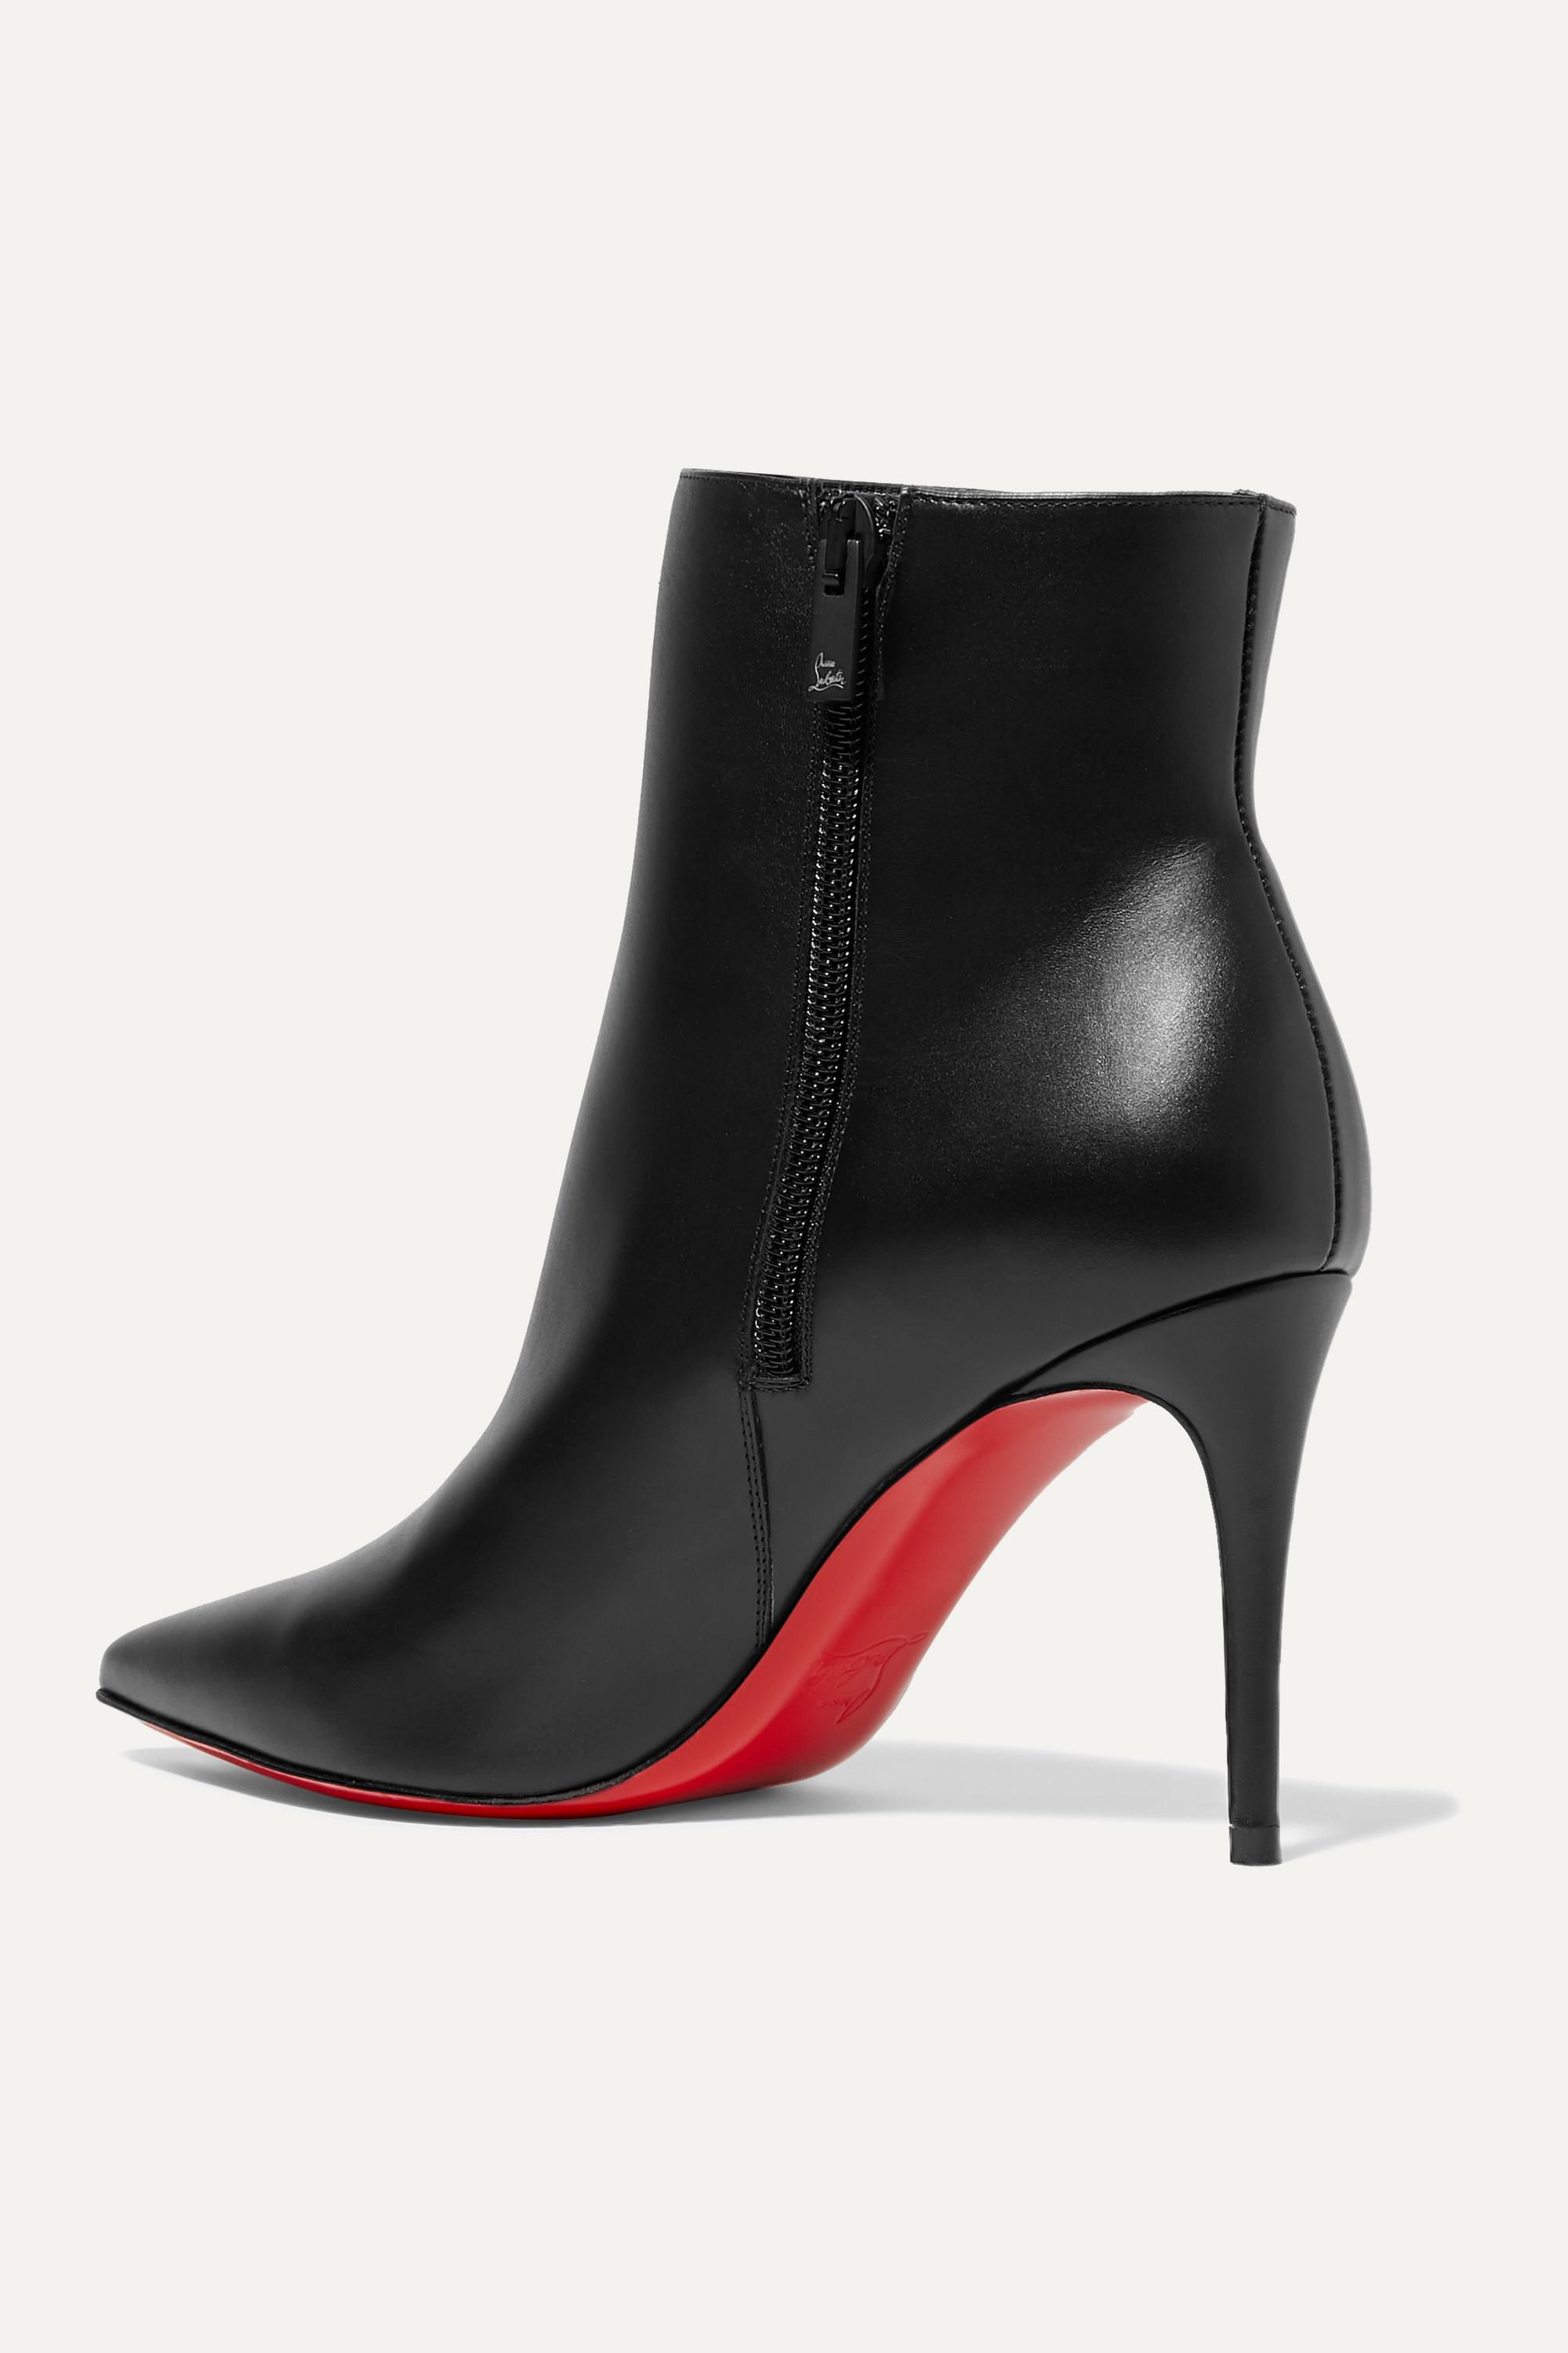 Christian Louboutin Leather So Kate 85 Ankle Boots in Black - Lyst